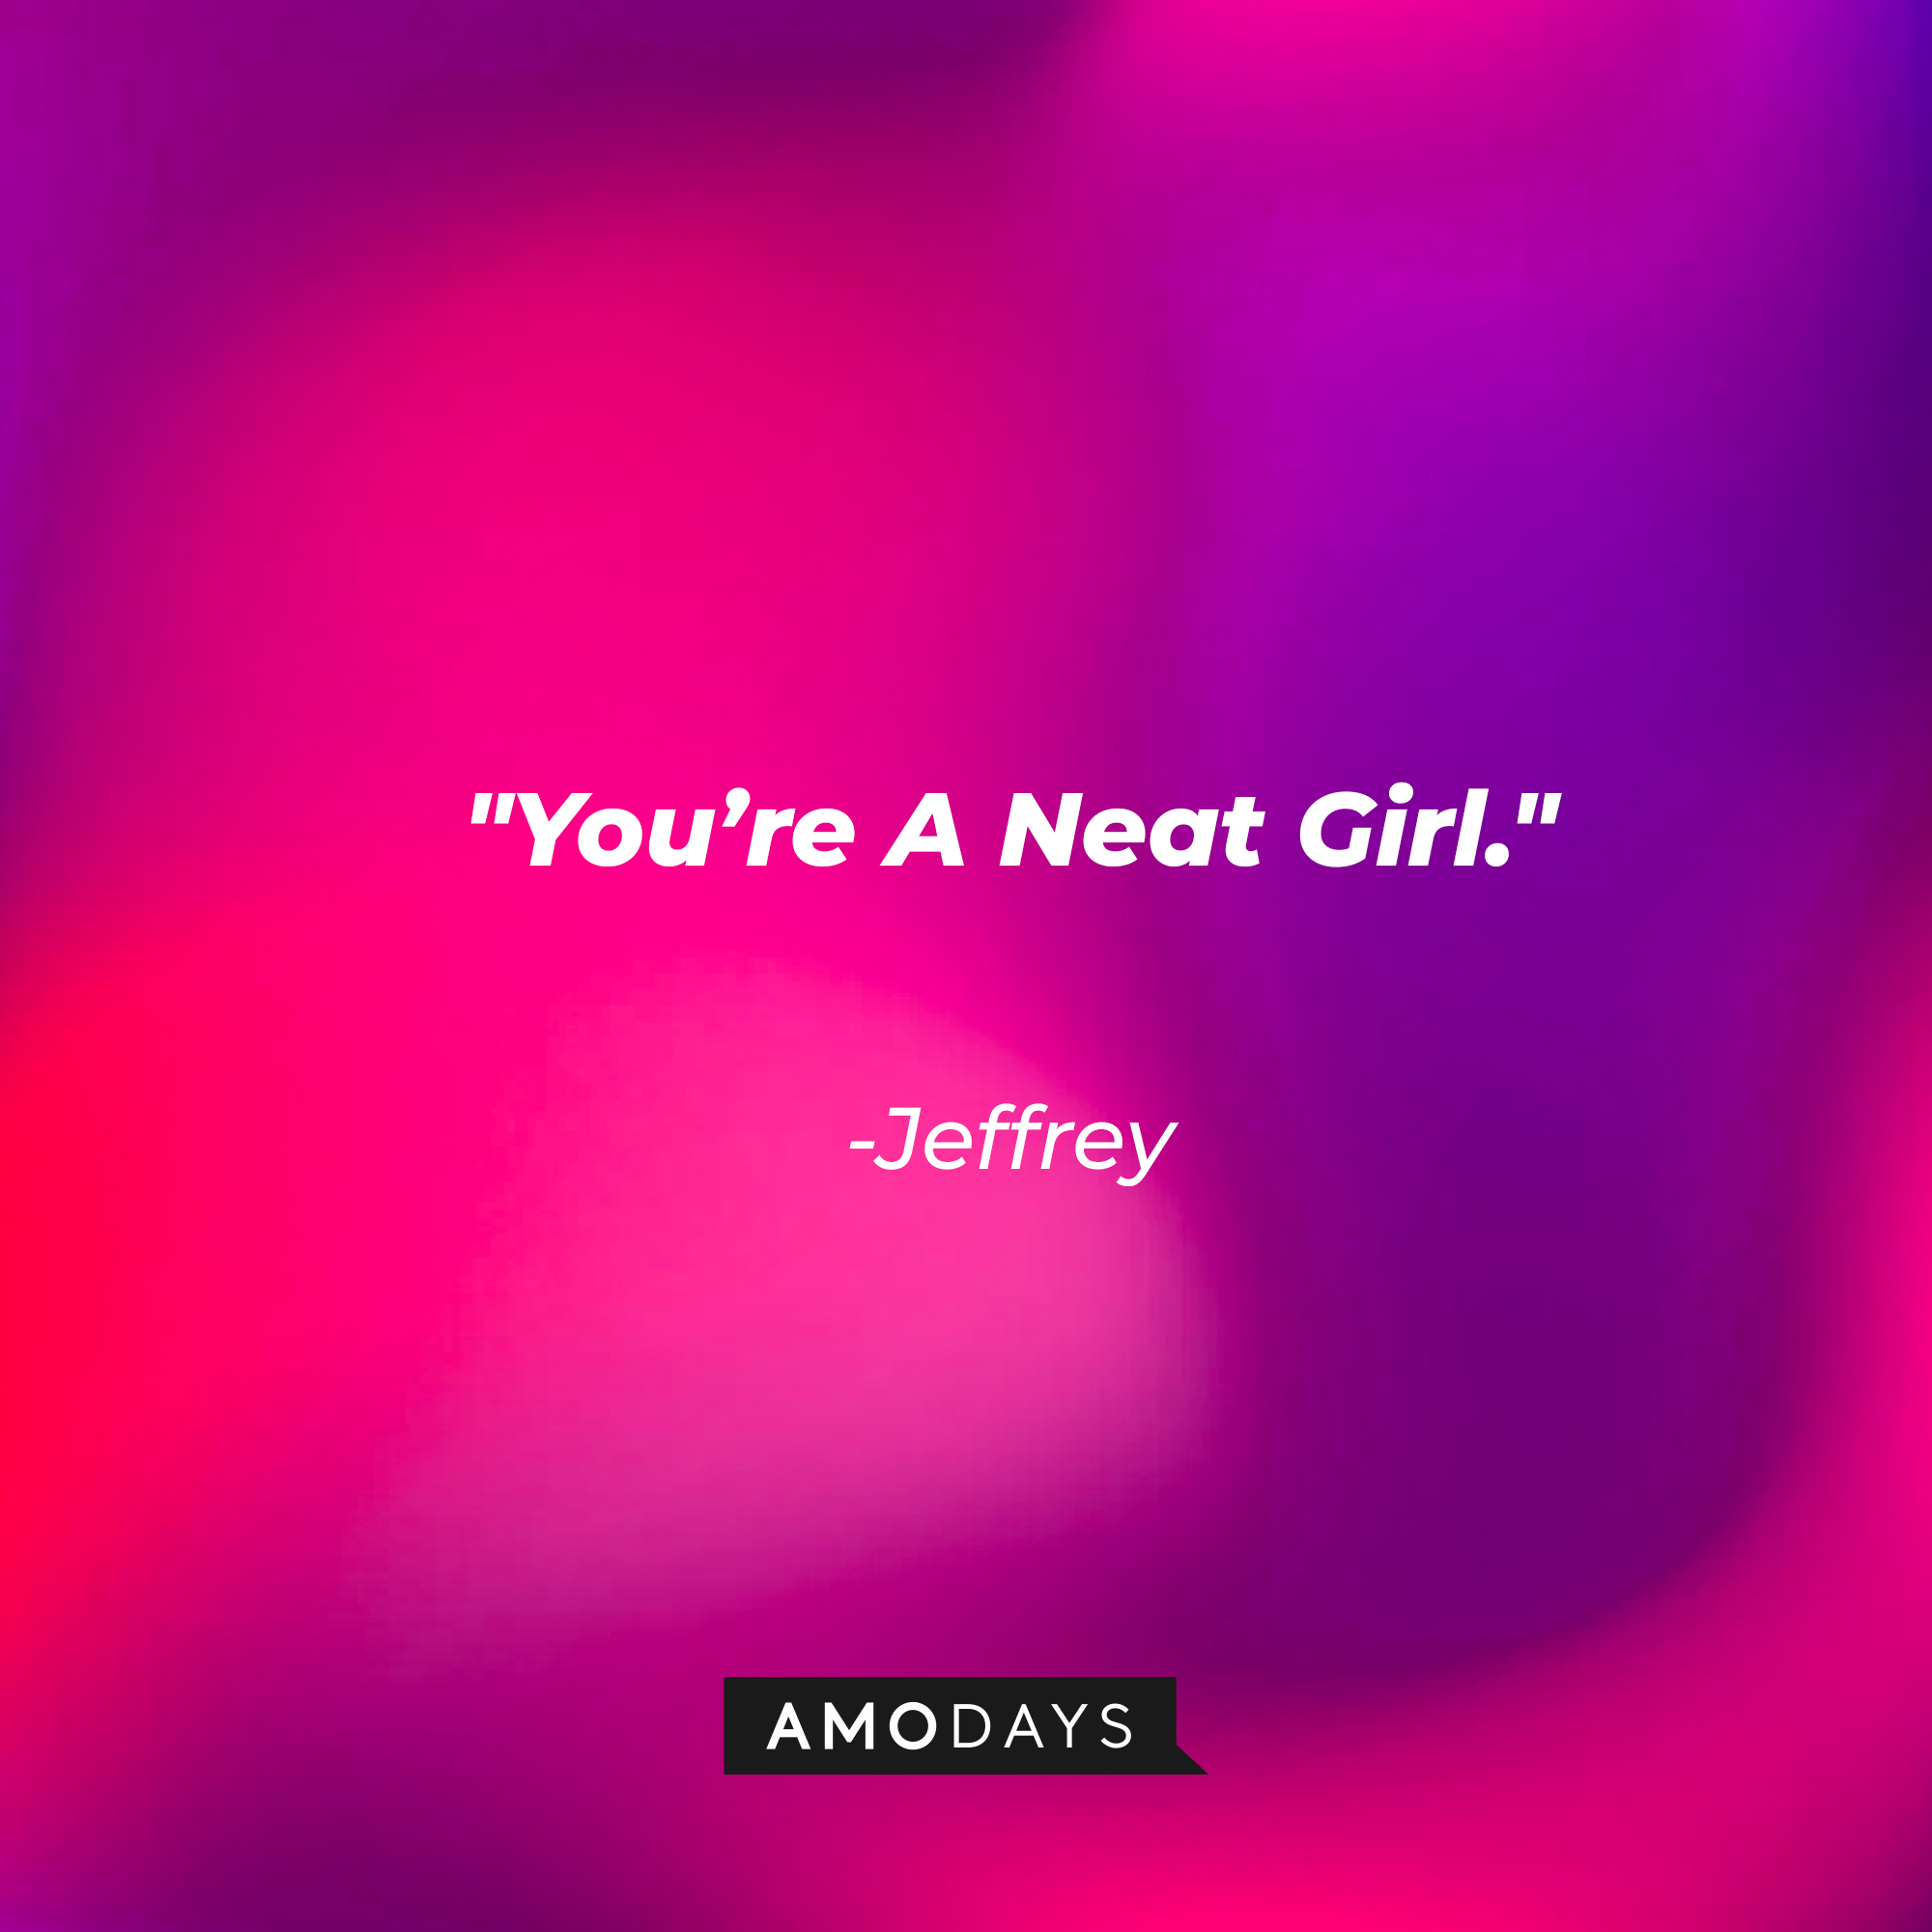 Jeffrey with his quote: "You're A Neat Girl."  | Source: facebook.com/BlueVelvetMovie